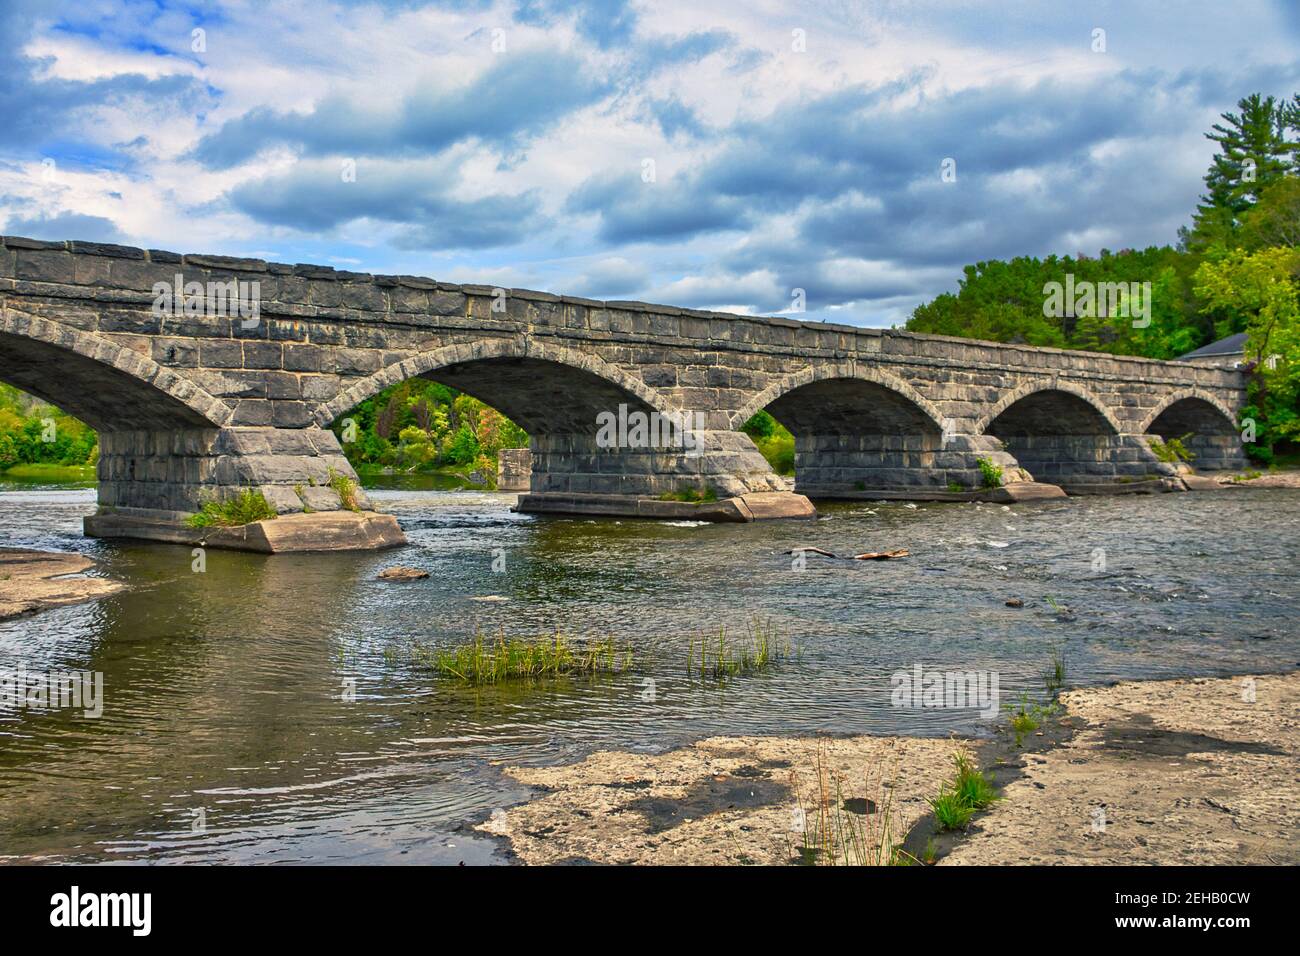 The five-arch stone bridge at Pakenham, Ontario, Canada was built in 1903 and is the only such bridge to exist in North America. Stock Photo